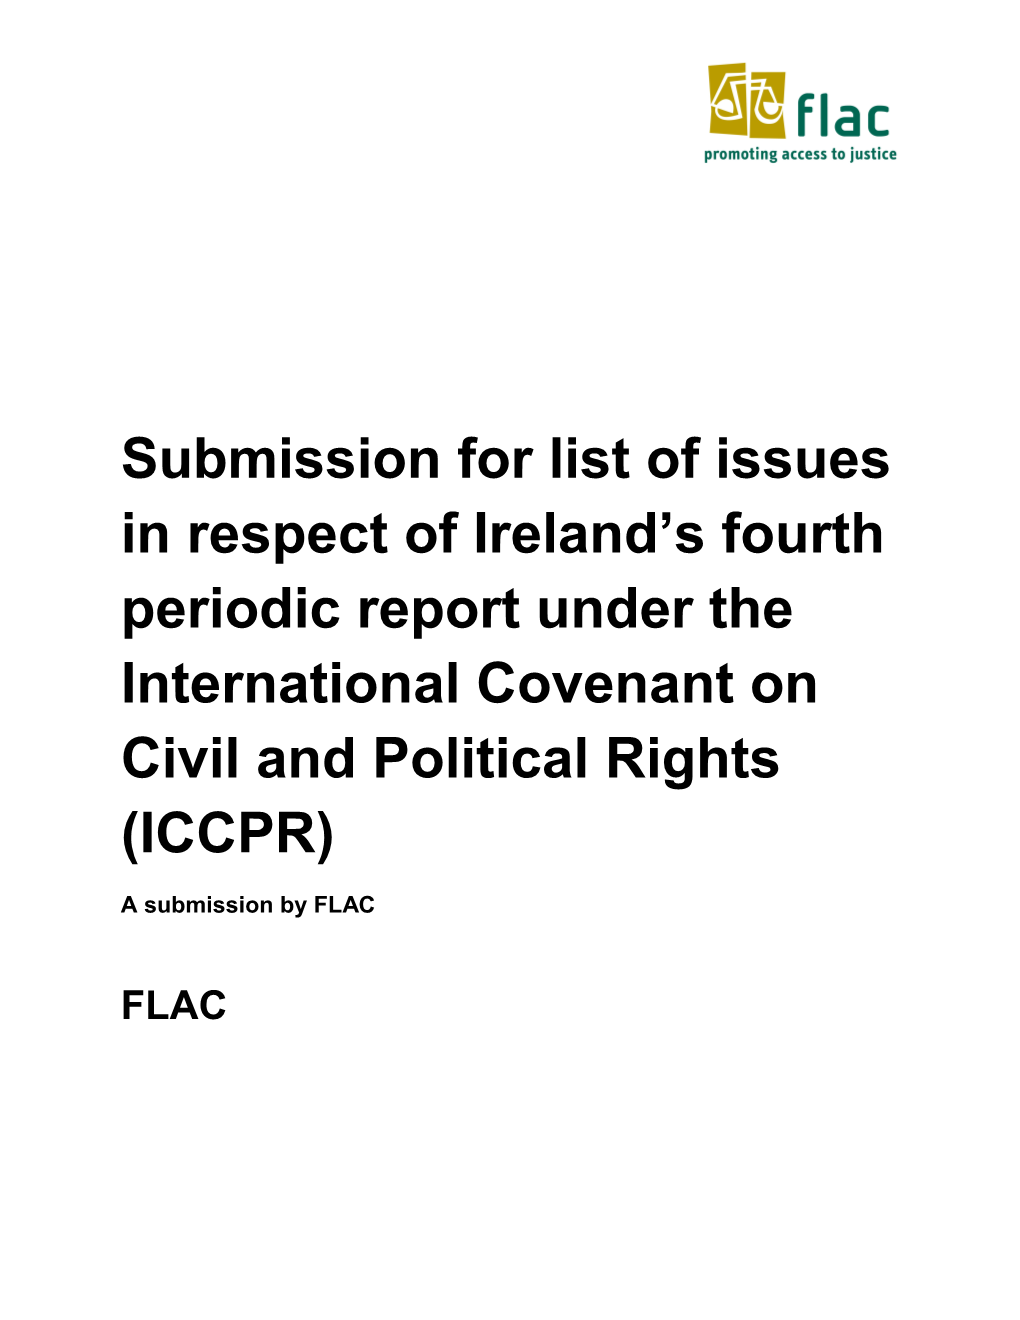 Submission for List of Issues in Respect of Ireland S Fourth Periodic Report Under The